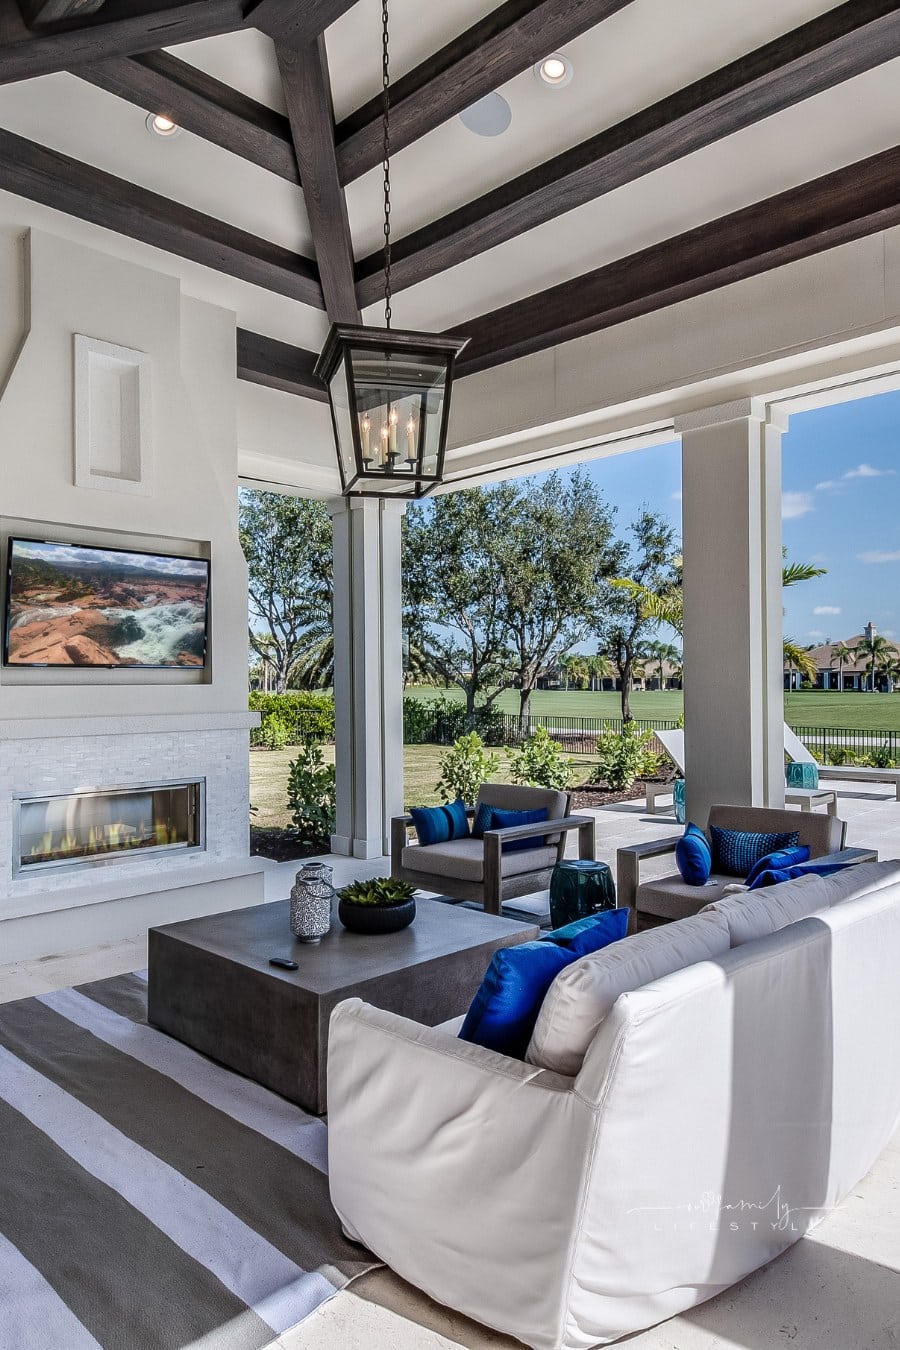 Outdoor living space next to golf course